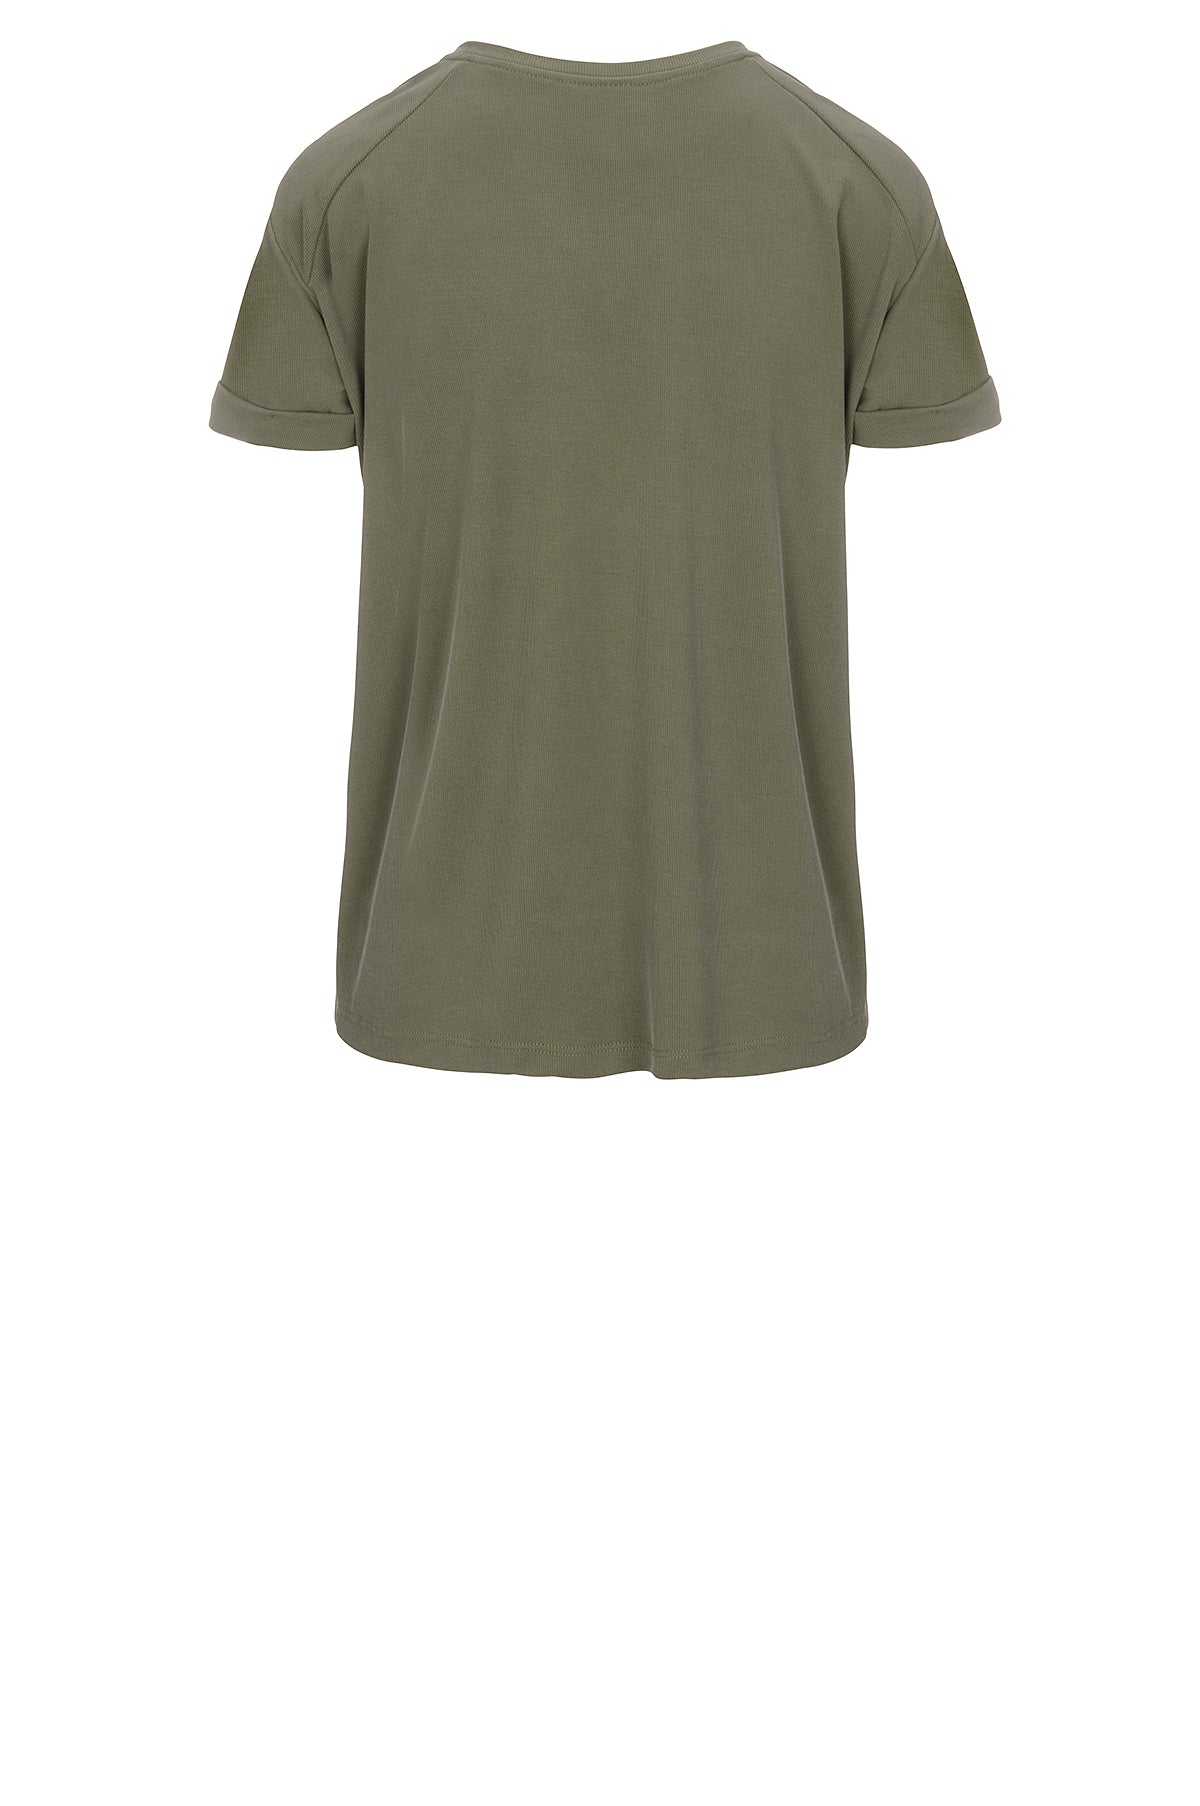 LUXZUZ // ONE TWO Karin T-Shirt 633 Army